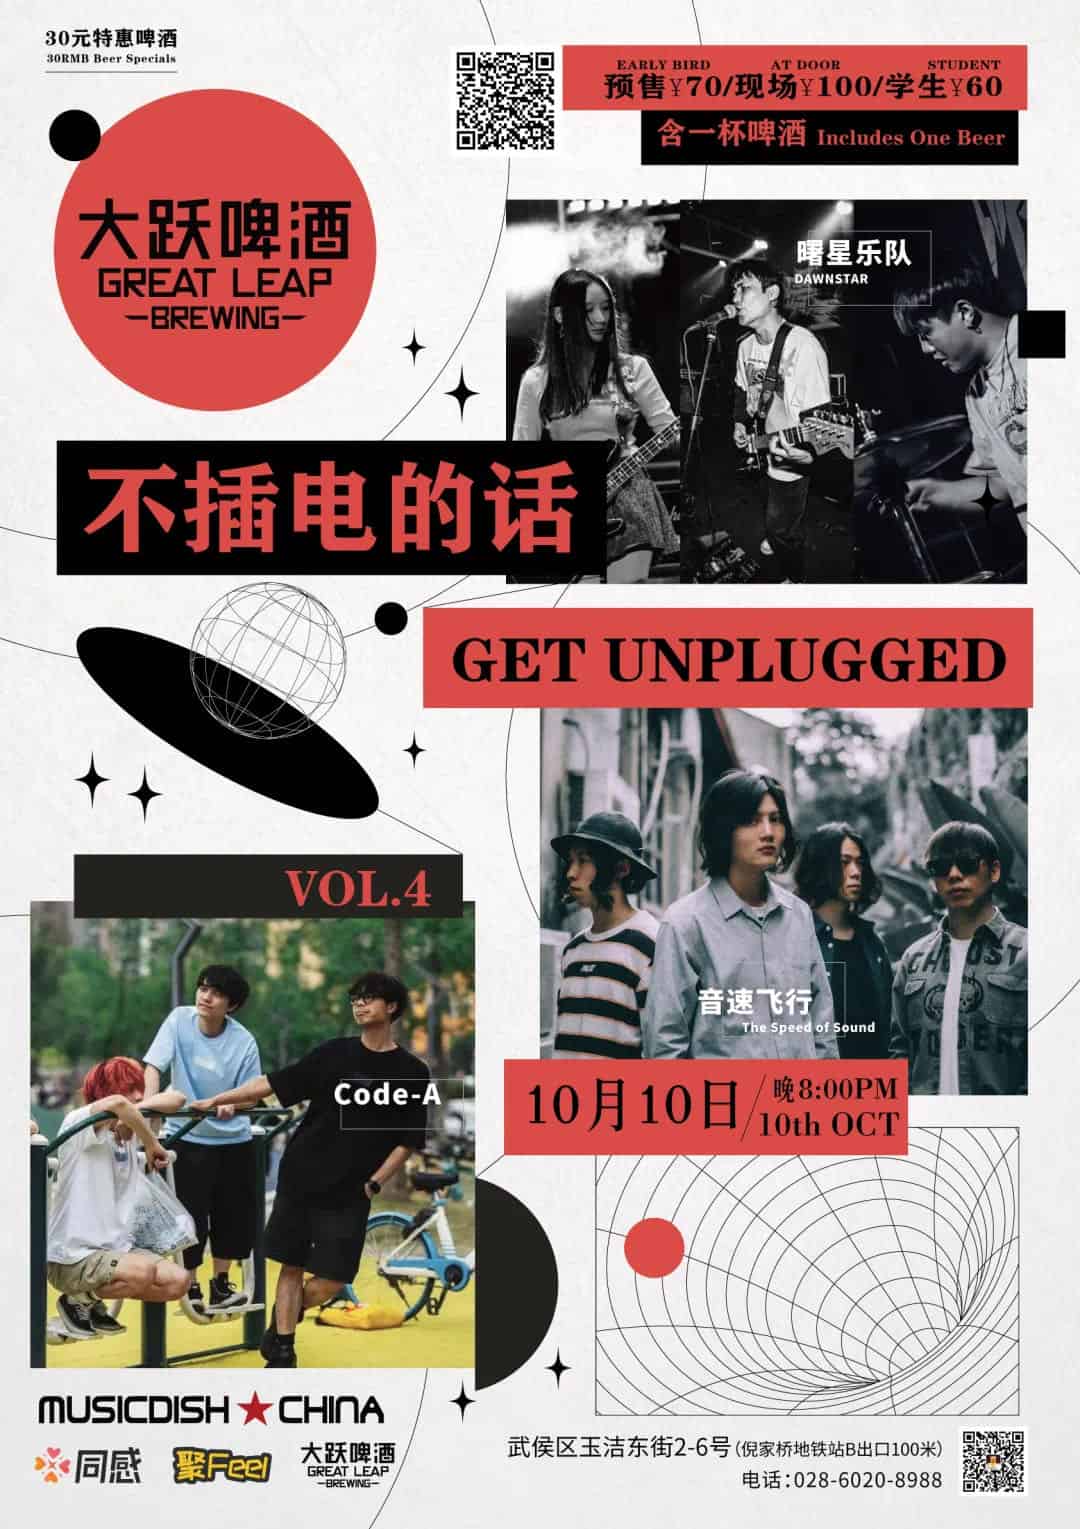 Get Unplugged gig Great Leap chengdu expat 1